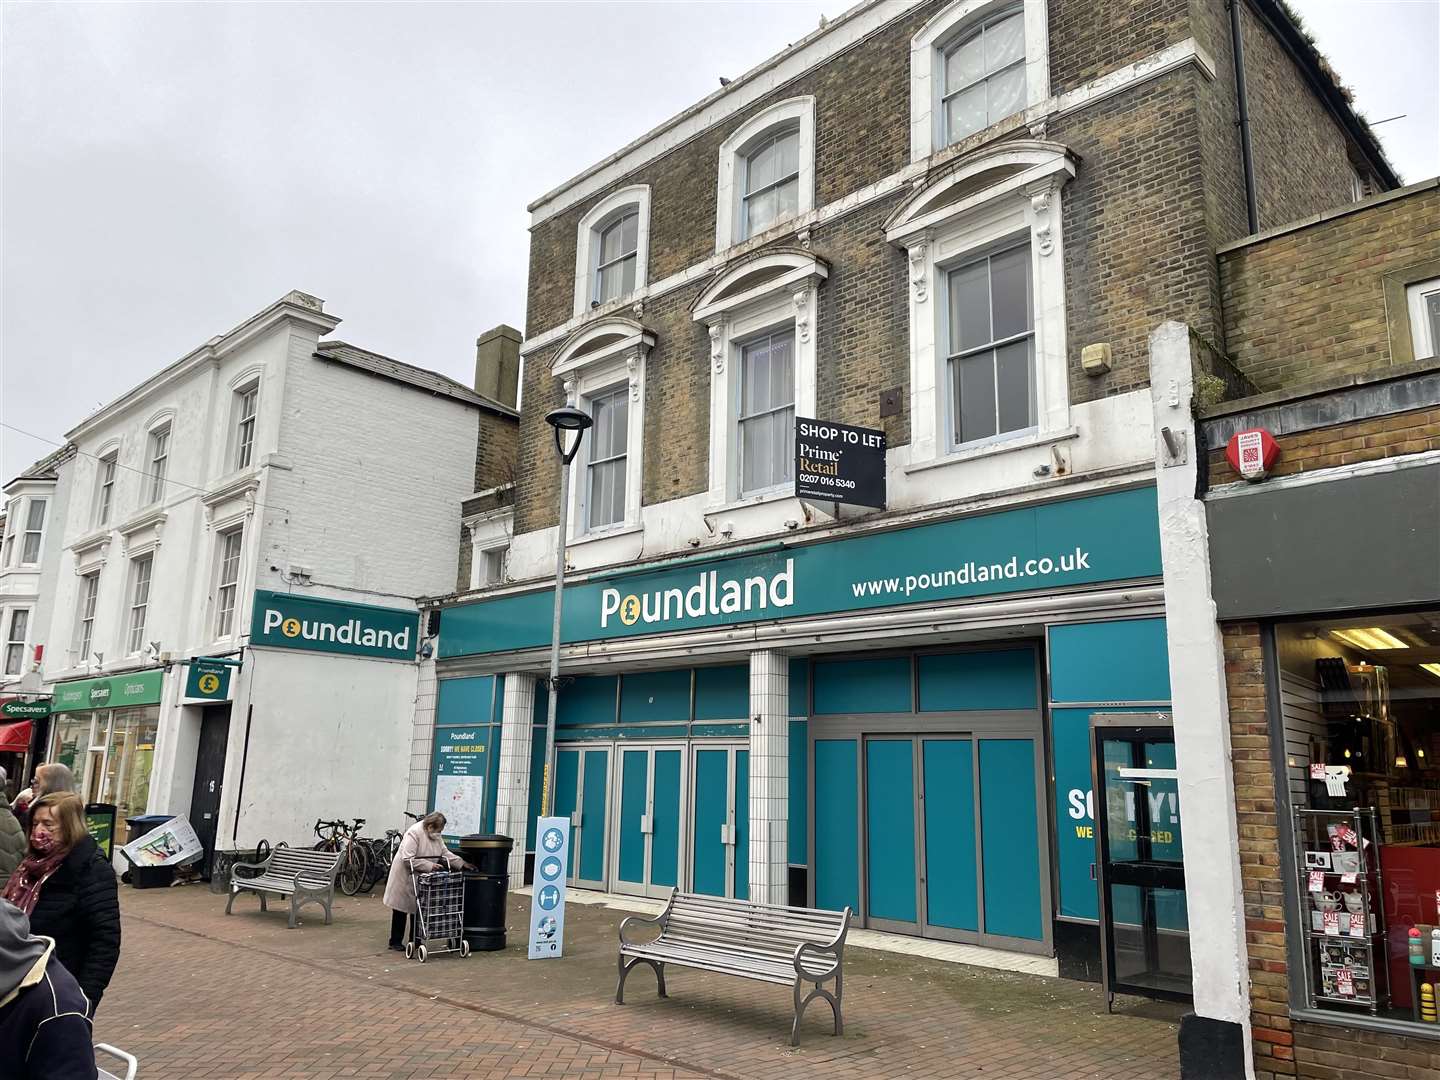 Travelodge is 'reviewing' the former Poundland premises in Deal High Street